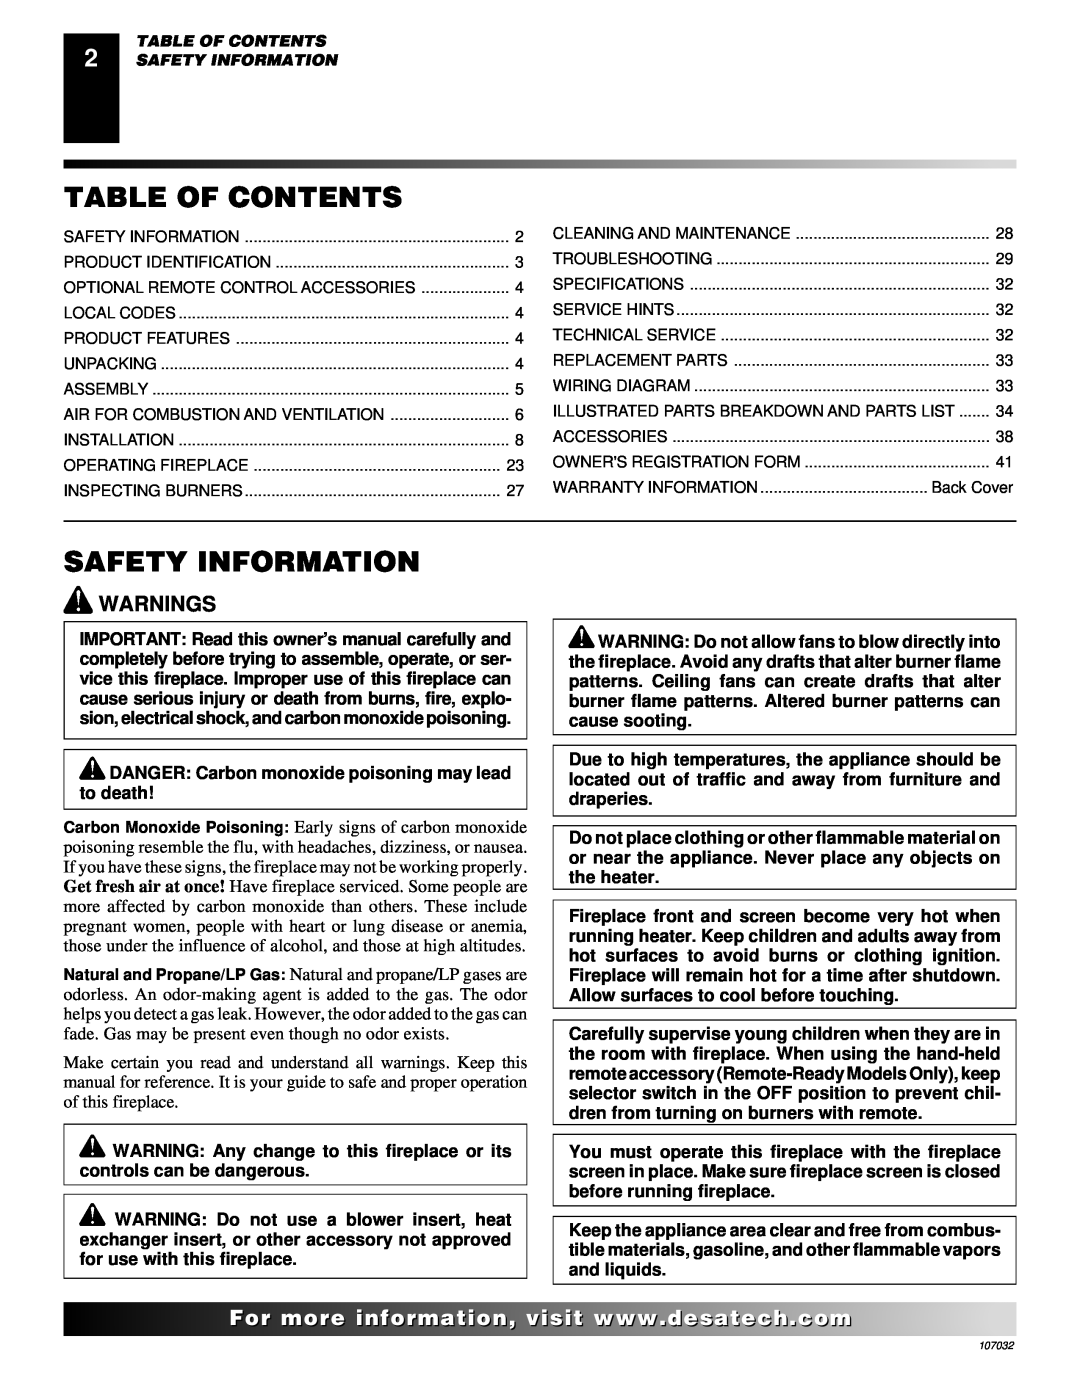 Desa VMH10TPB installation manual Table Of Contents, Safety Information, Warnings 